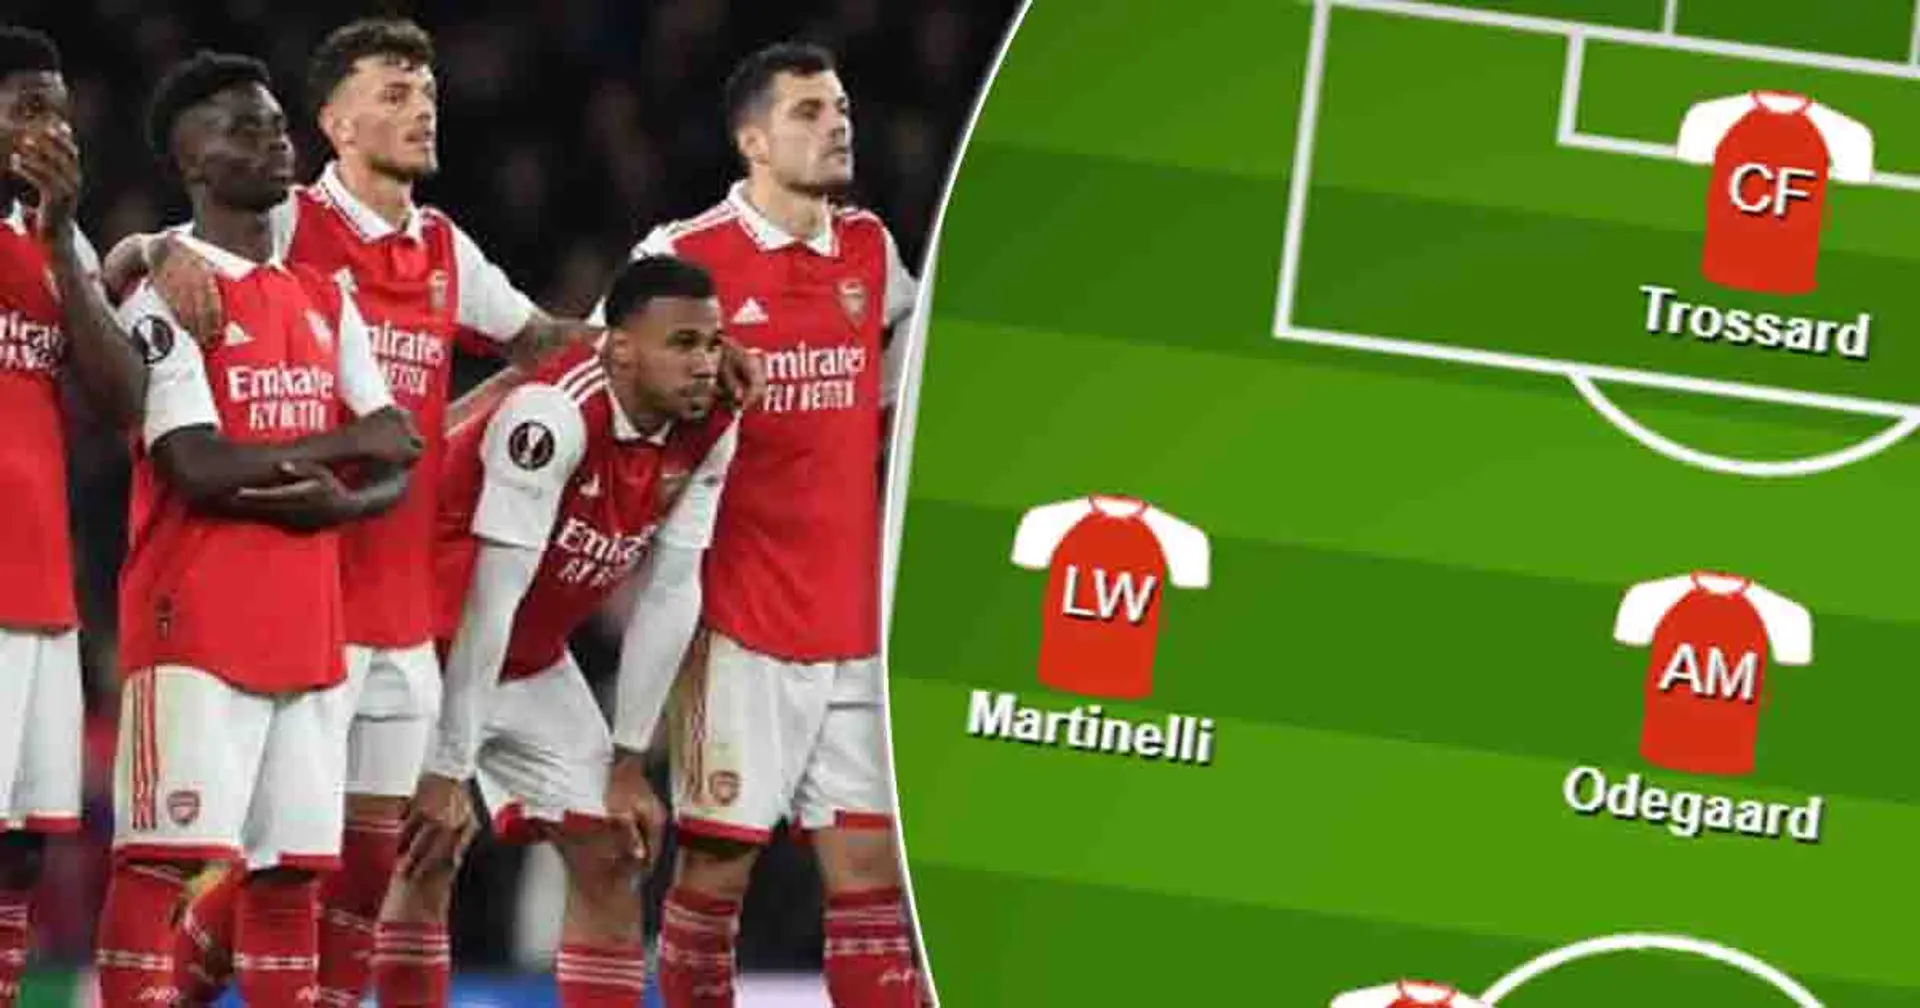 'Trossard is a game-changer': Arsenal fans select ultimate XI for Leeds United clash